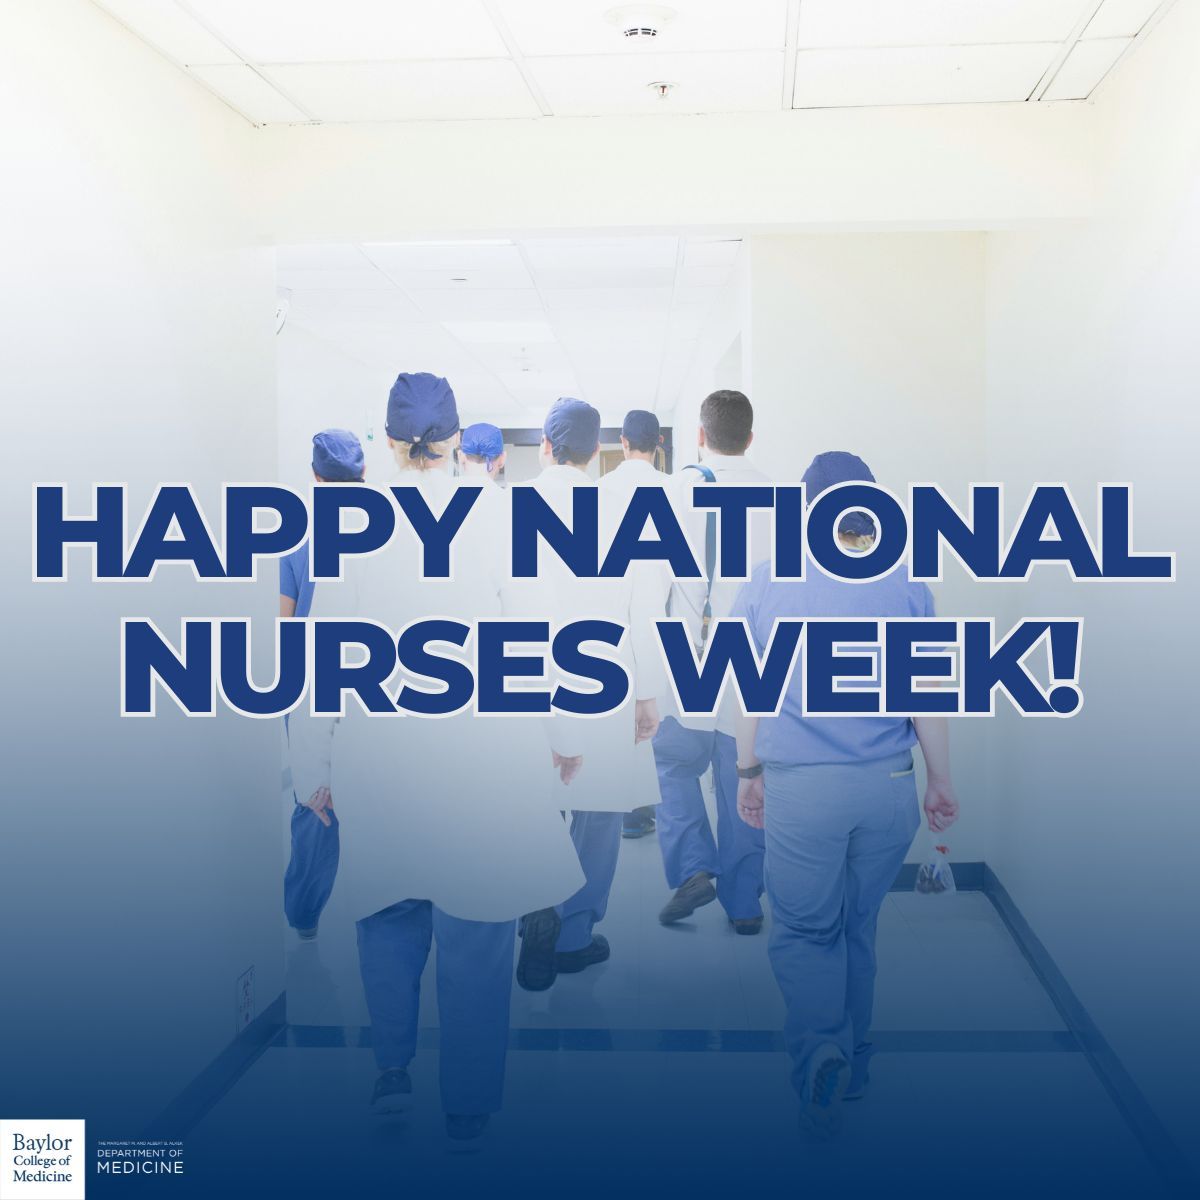 Happy National Nurses Week to all the incredible nurses out there! Your dedication, compassion, and expertise make a world of difference every day. Thank you for all that you do! 💙👩‍⚕️👨‍⚕️ #NationalNursesWeek #BCMDoM